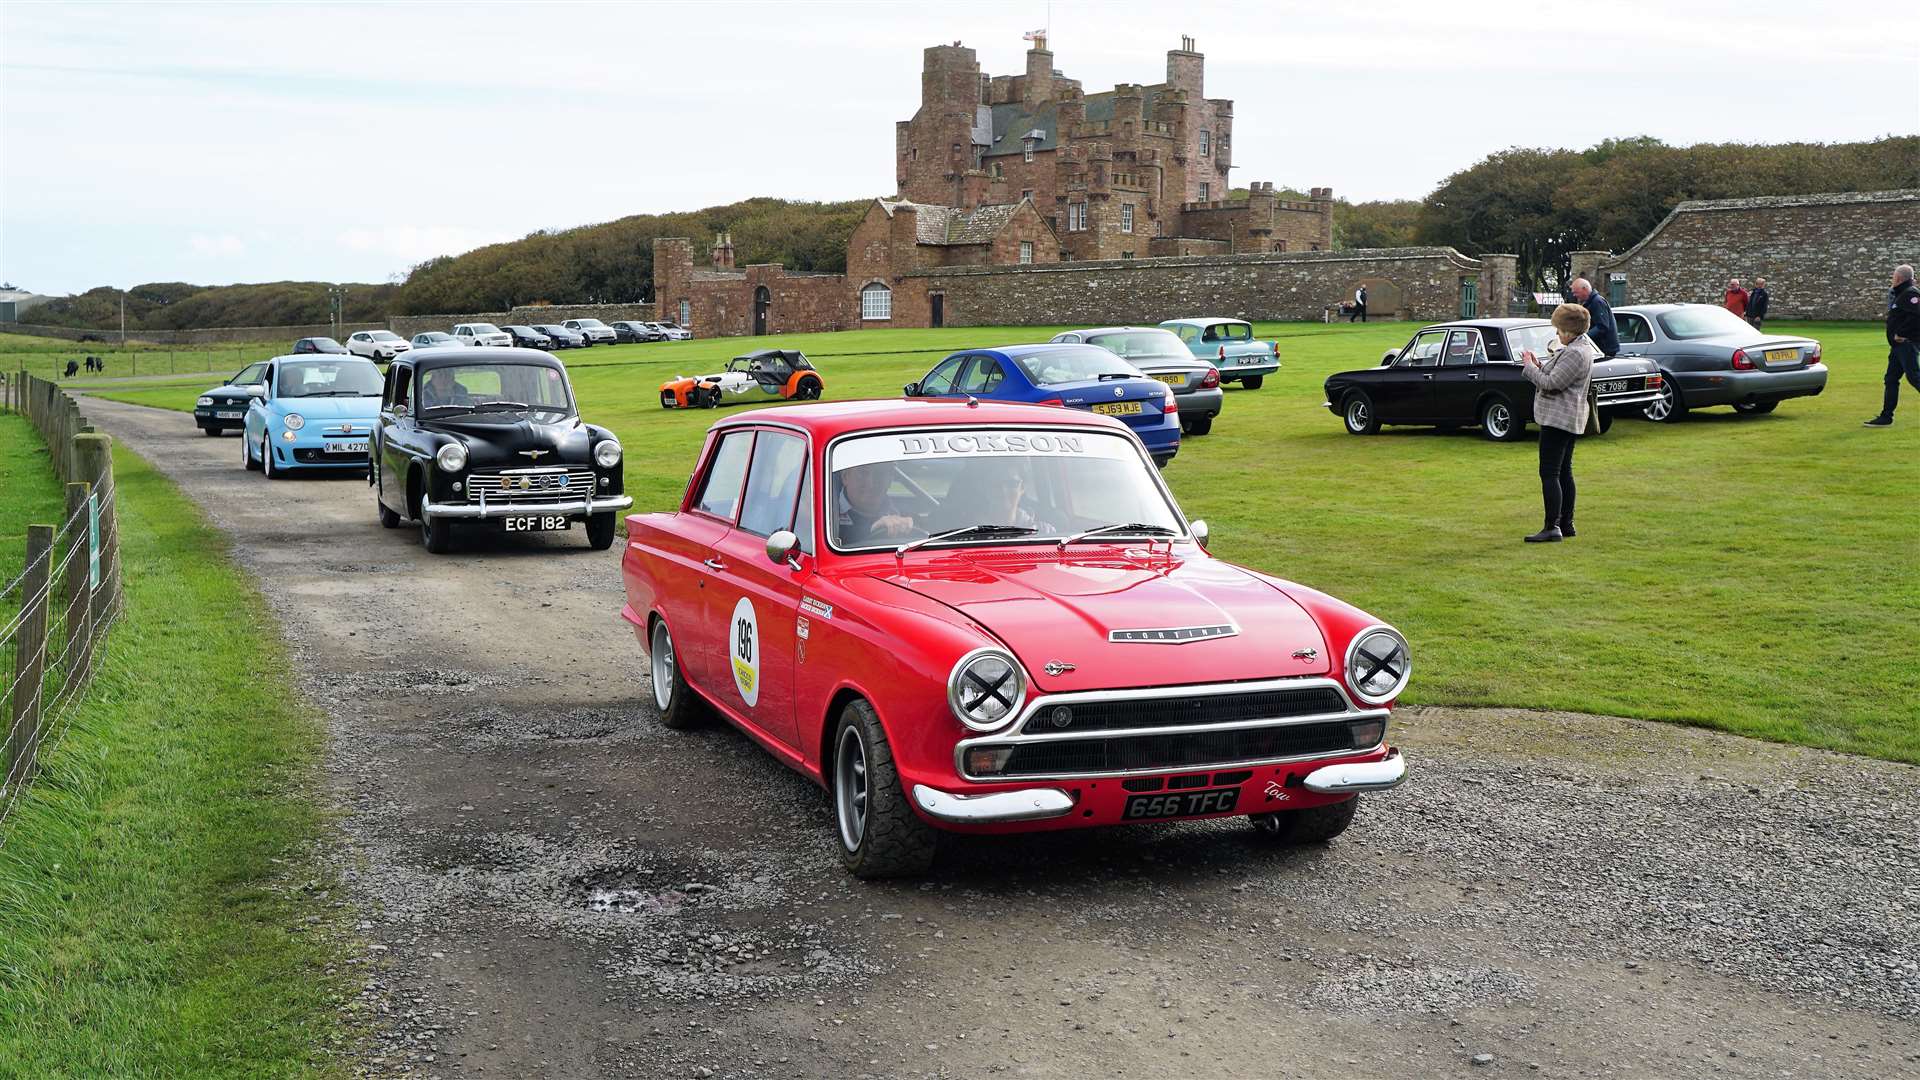 A variety of colourful vehicles leave the grounds of the castle in a steady convoy. Picture: DGS